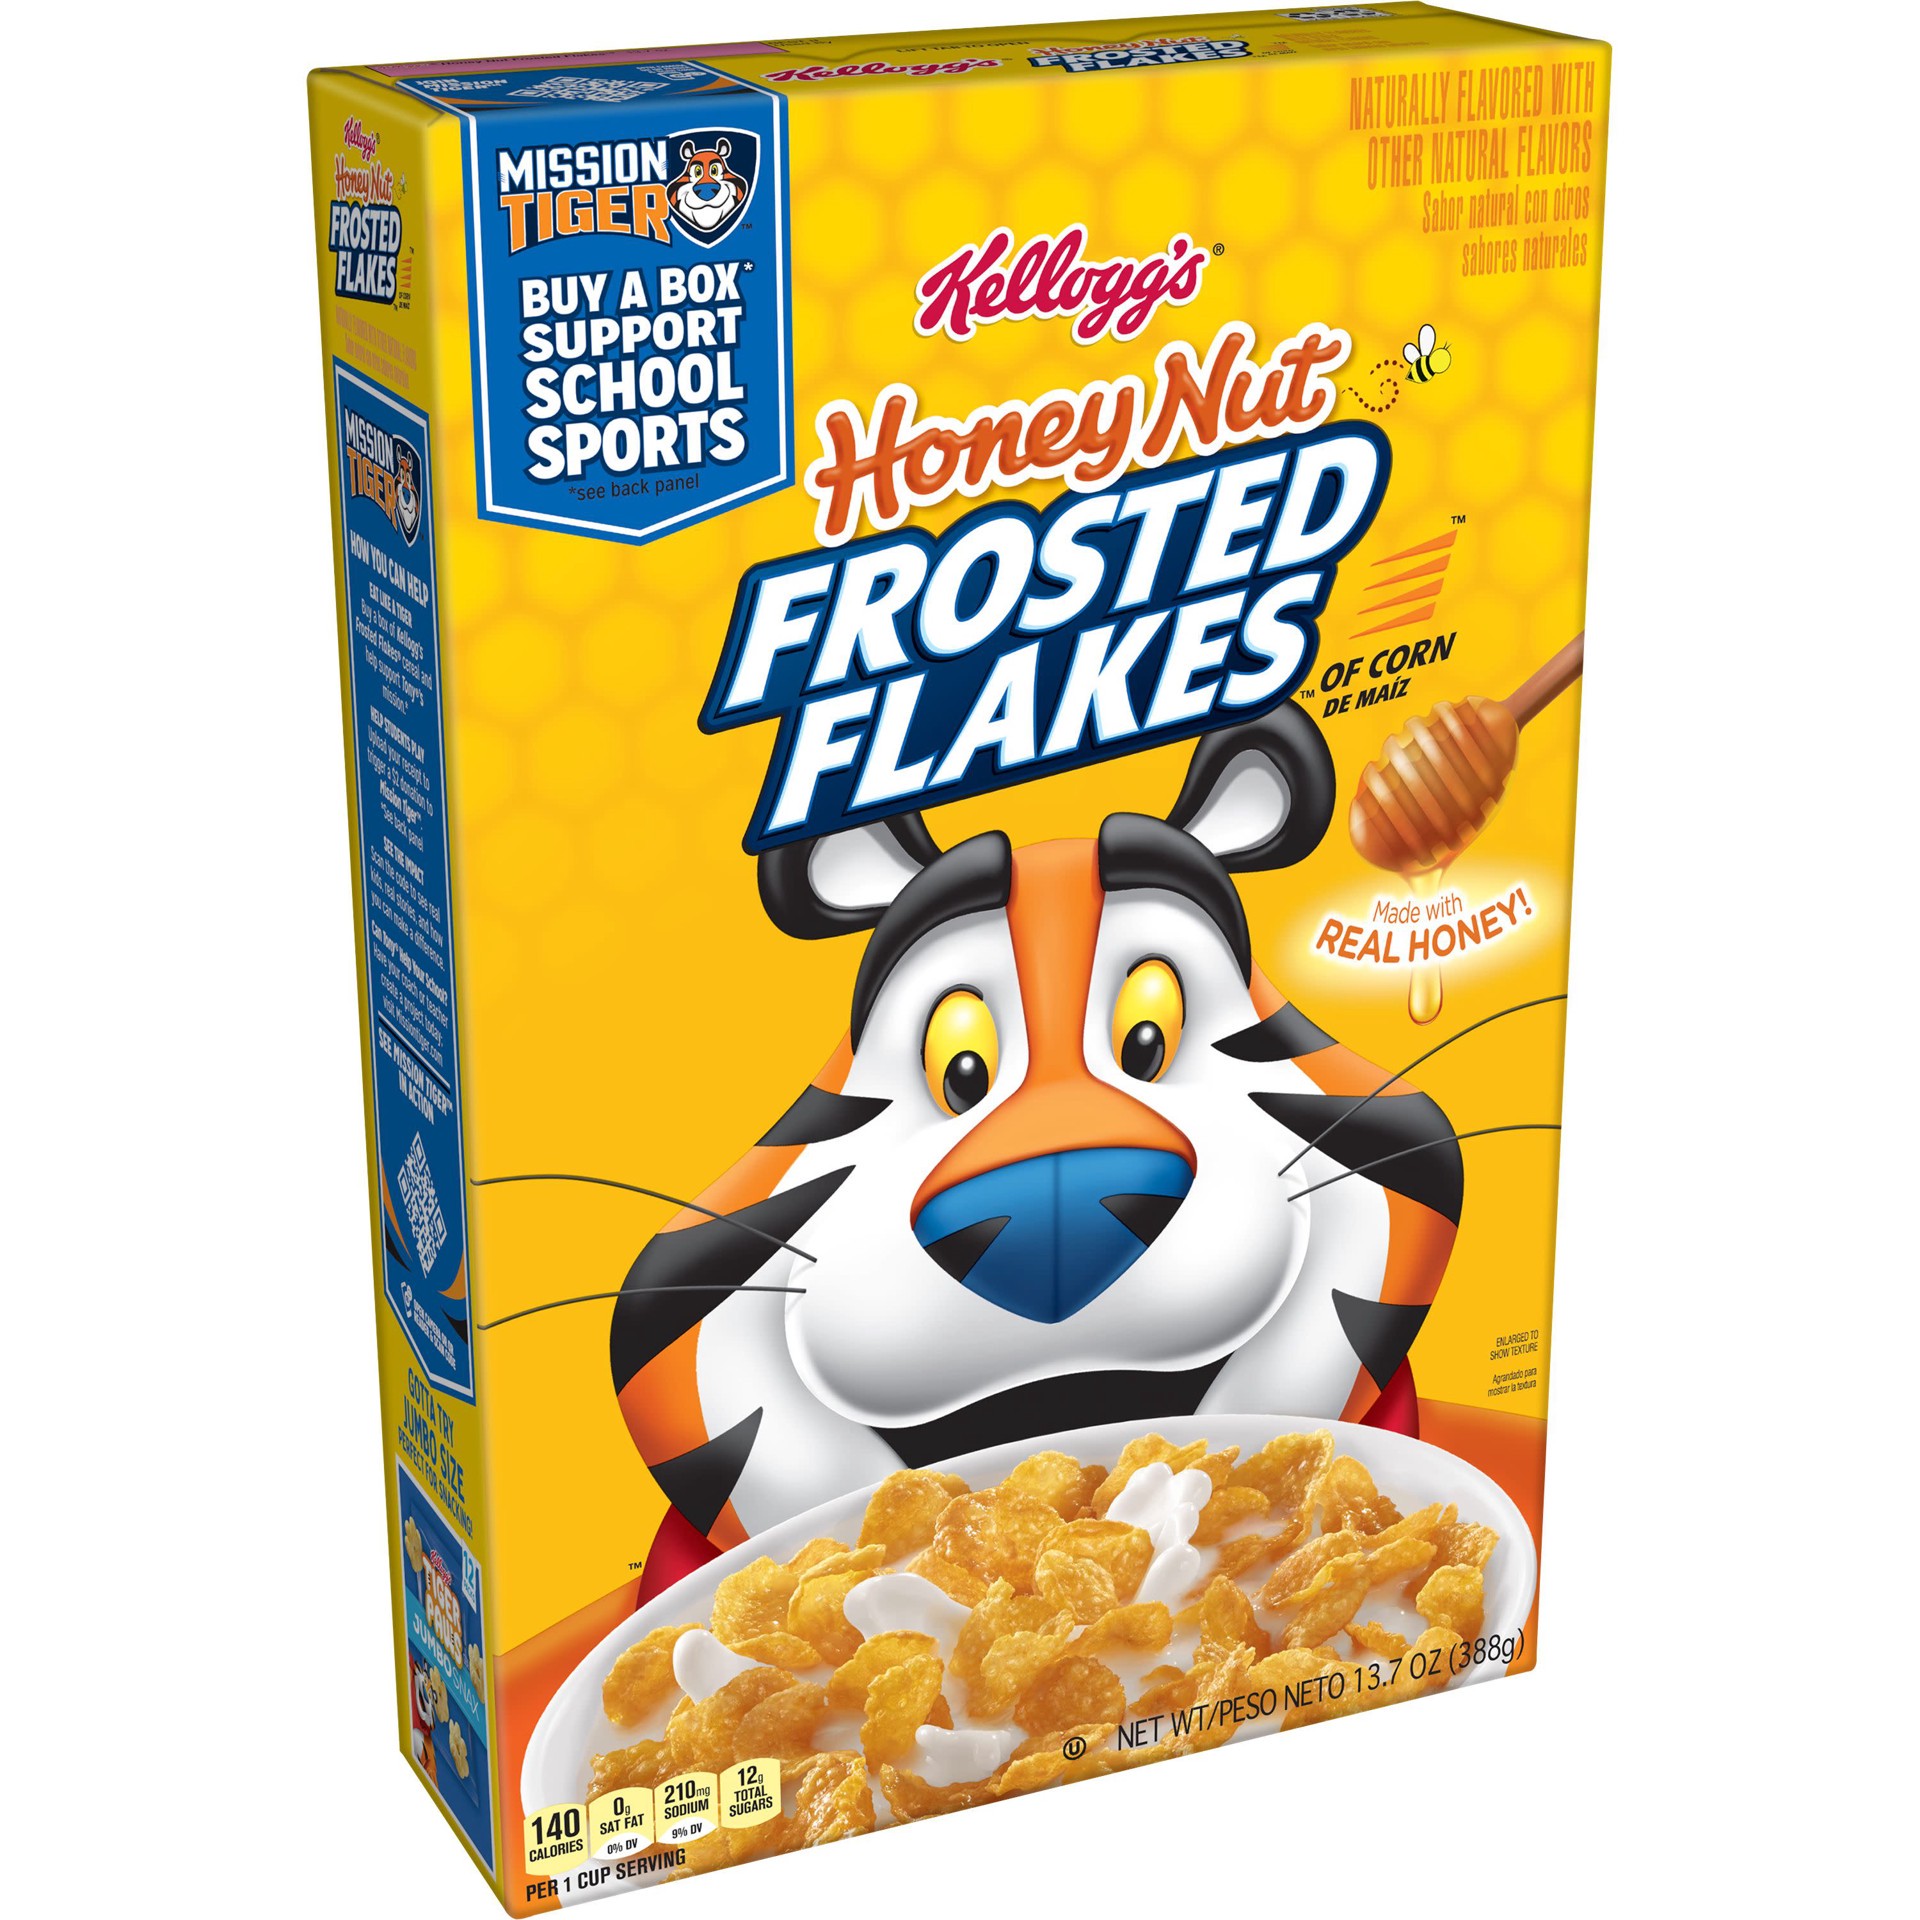 slide 1 of 4, Frosted Flakes Kellogg's Frosted Flakes Breakfast Cereal, 8 Vitamins and Minerals, Kids Snacks, Honey Nut, 13.7oz Box, 1 Box, 13.7 oz